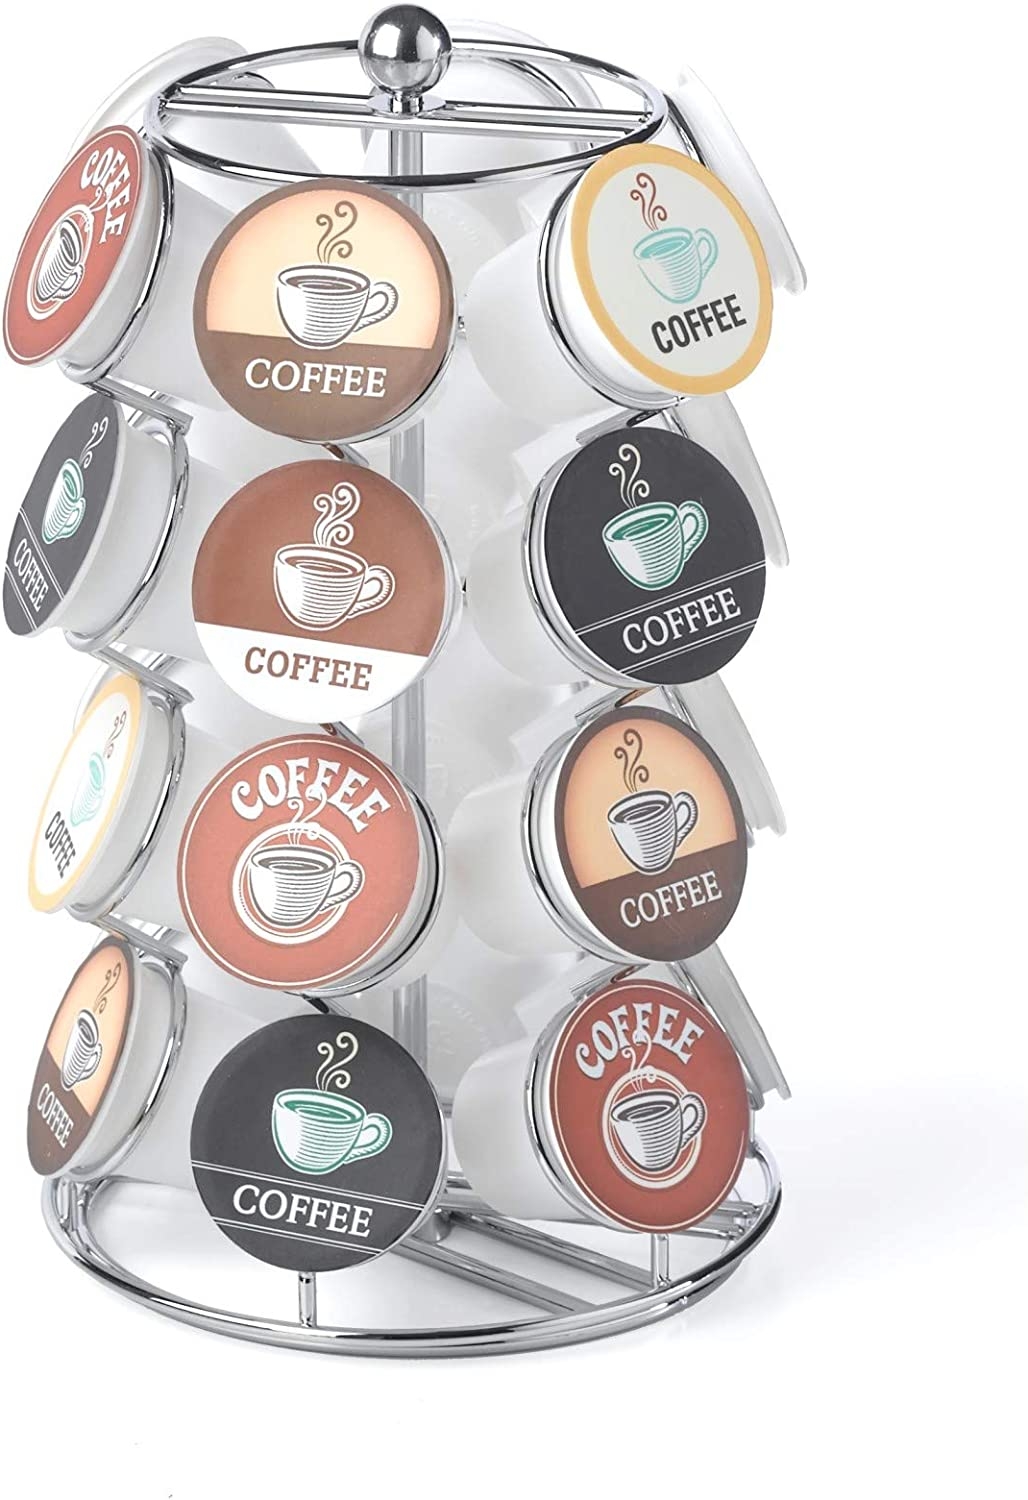 Nifty Coffee Pod Carousel – Compatible with K-Cups, 35 Pod Pack Storage, Spins 360-Degrees, Lazy Susan Platform, Modern Black